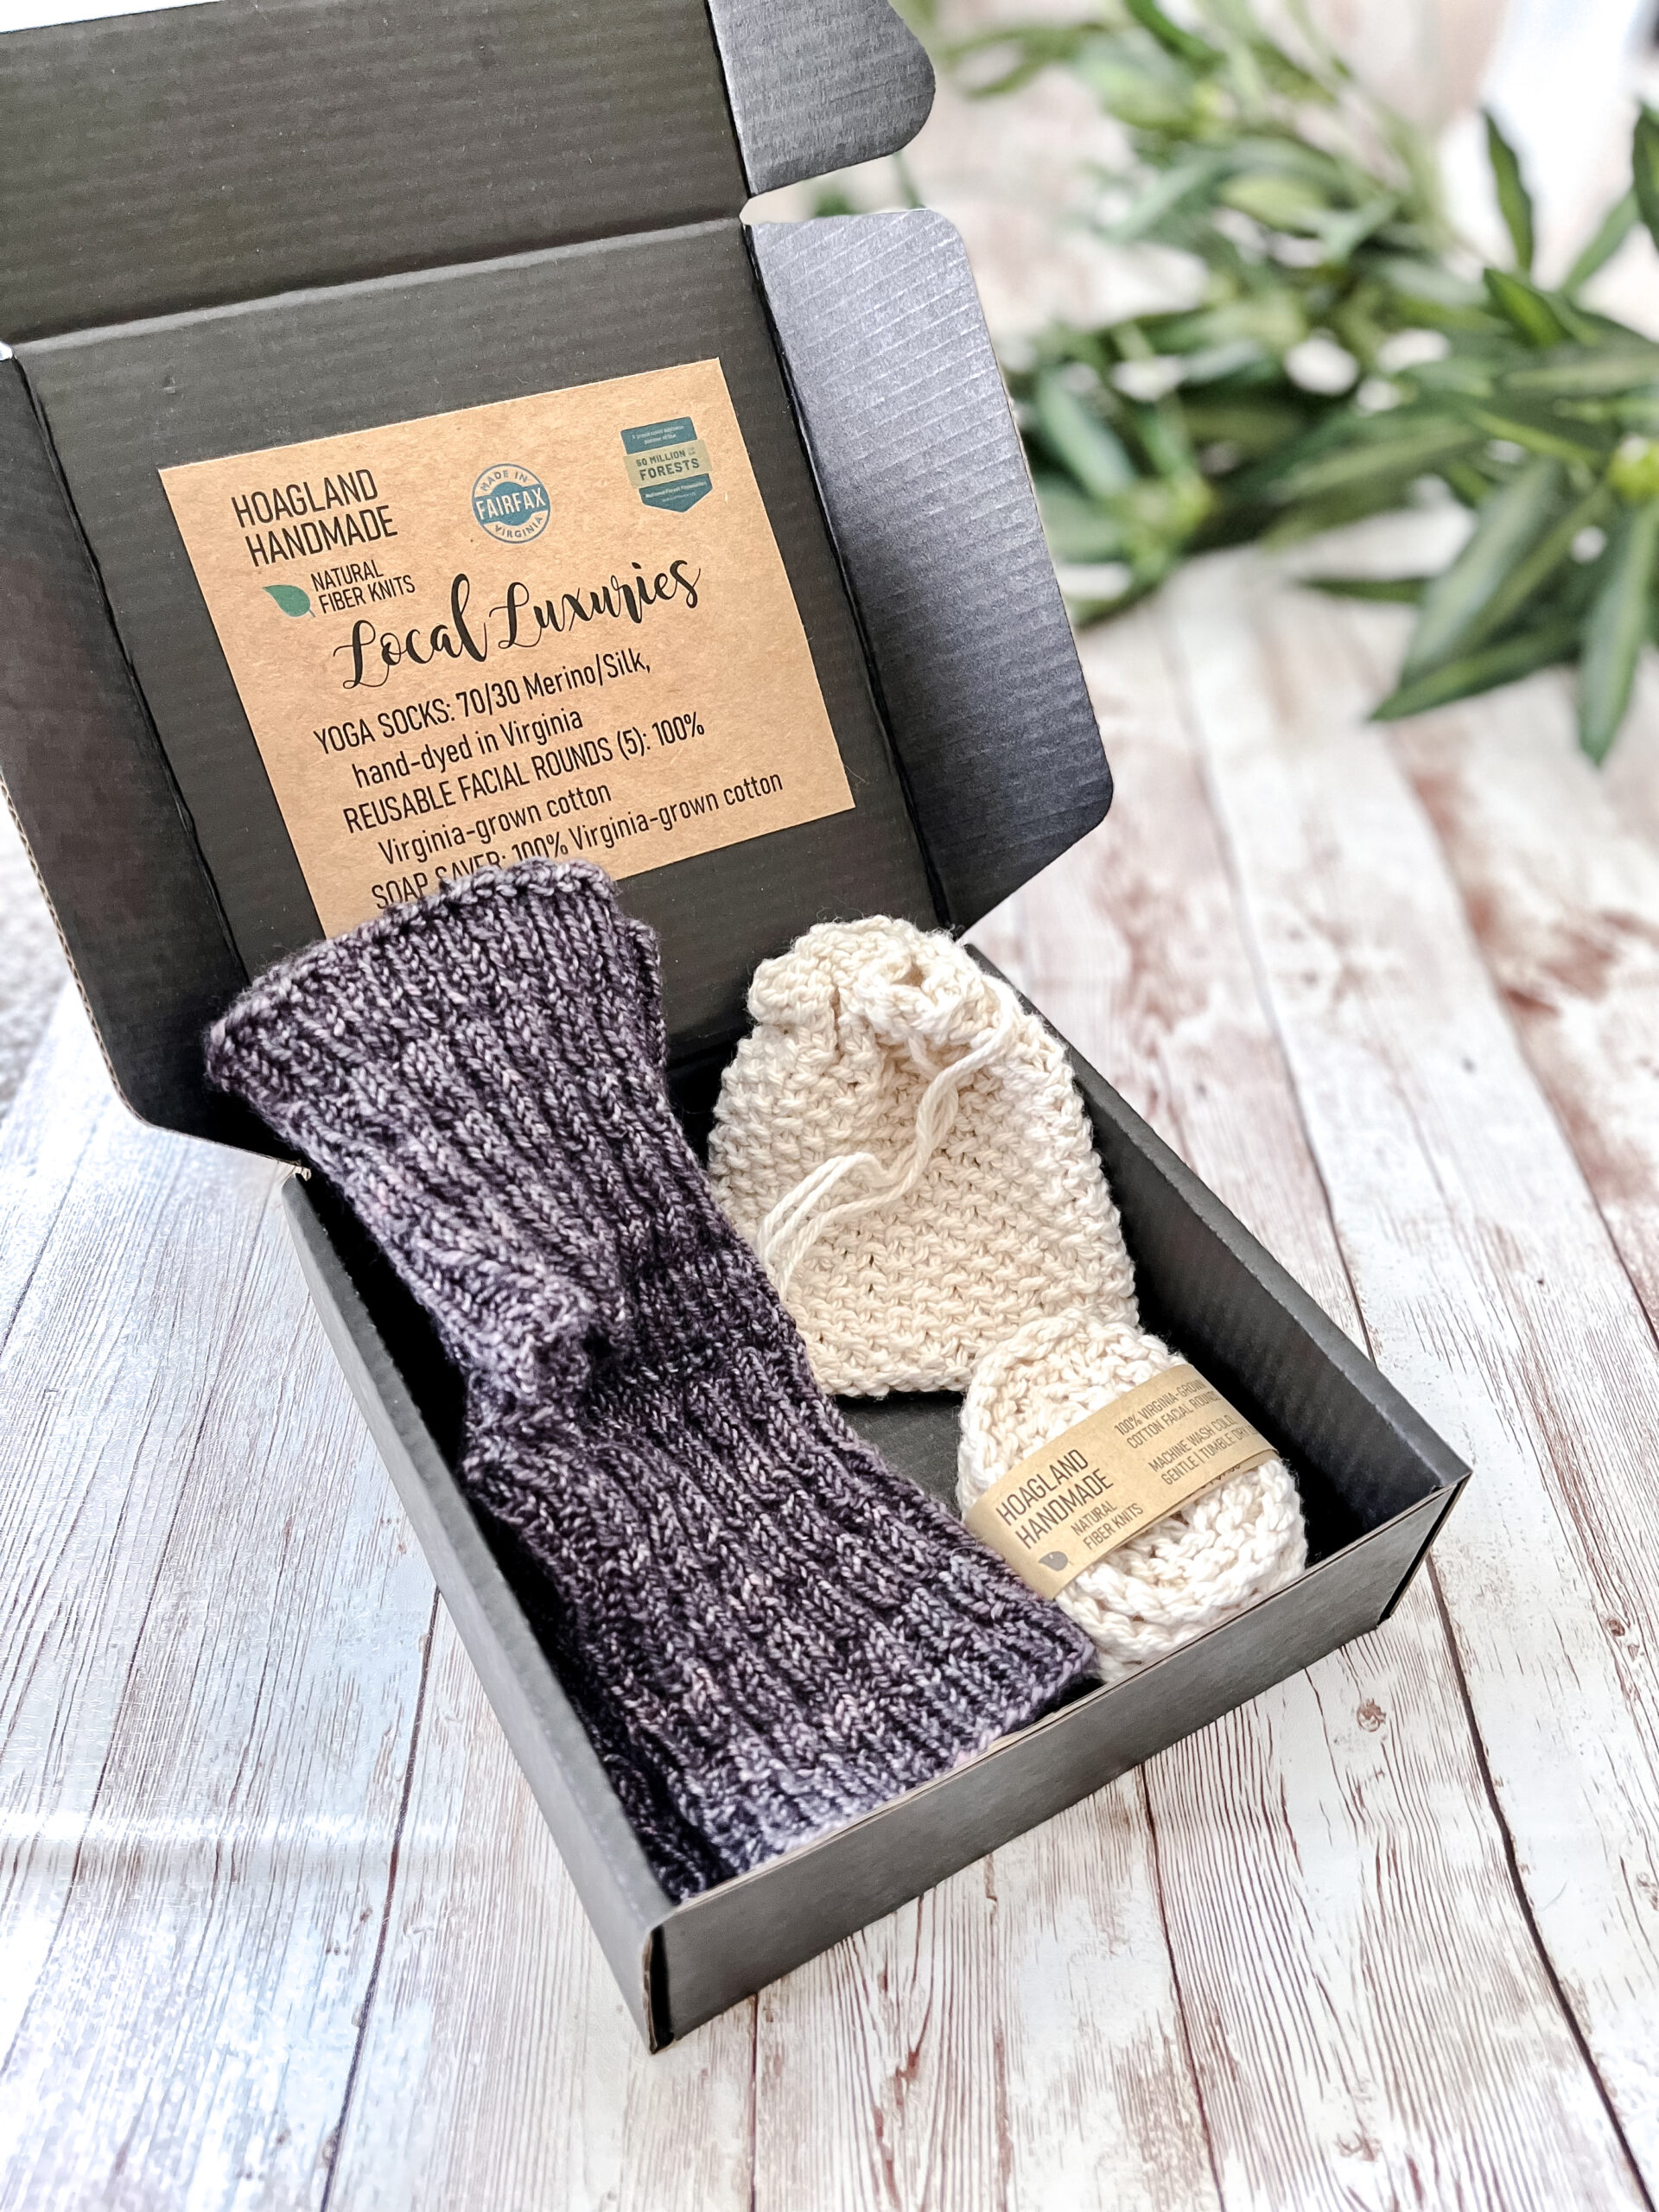 A black box contains a pair of hand-dyed merino/silk purplish gray & purple yoga socks, a Virginia-grown cotton soap saver and set of reusable facial rounds. The box sits on a wood panel with greenery in the background